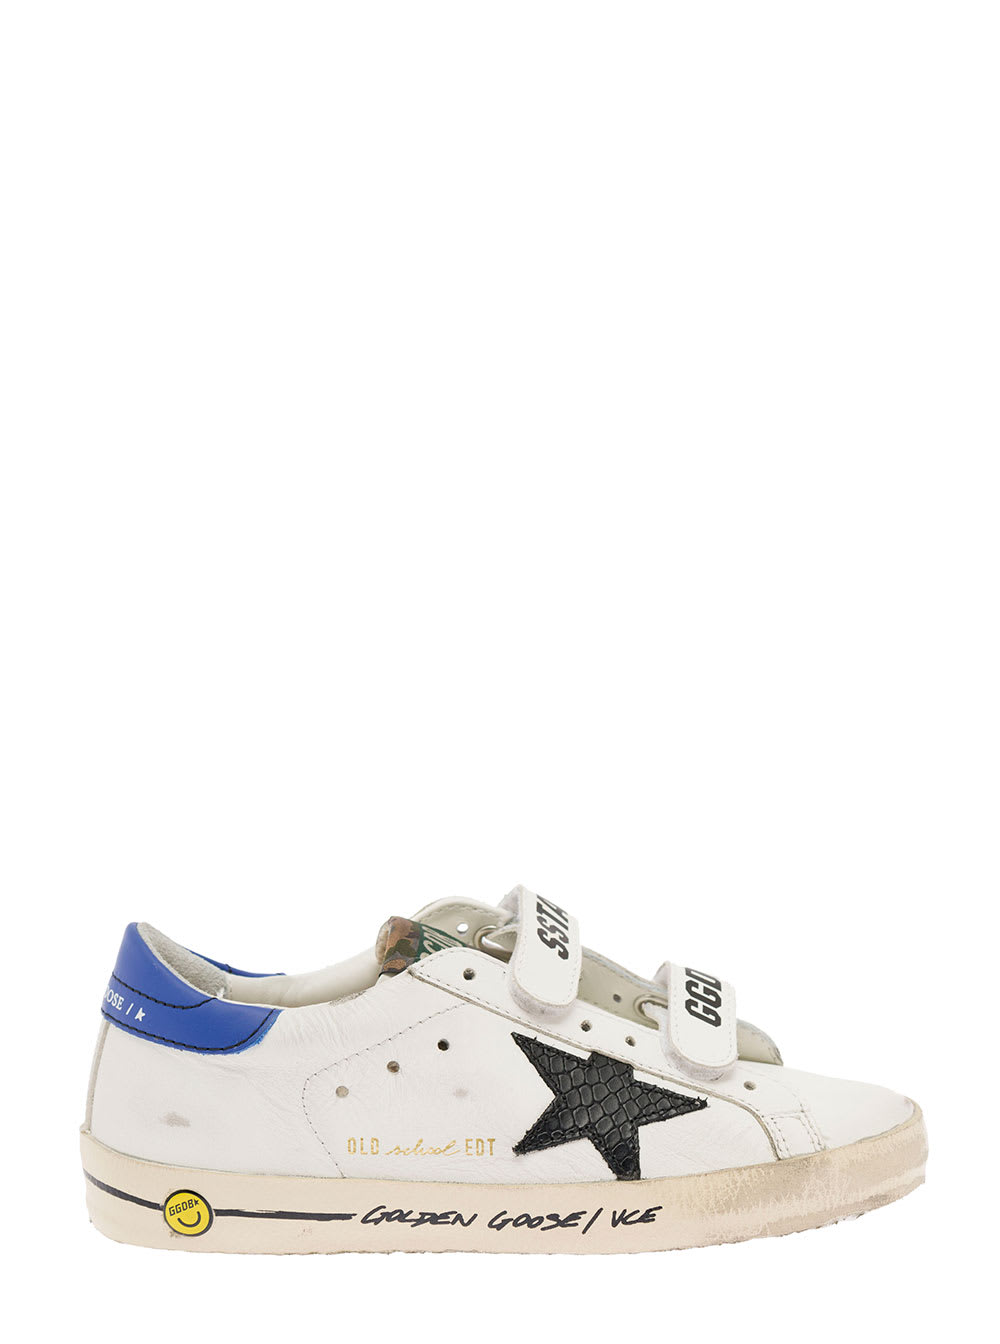 Golden Goose Golde Goose Kids Boys Old School White Leather Sneakers With Python Star Detail